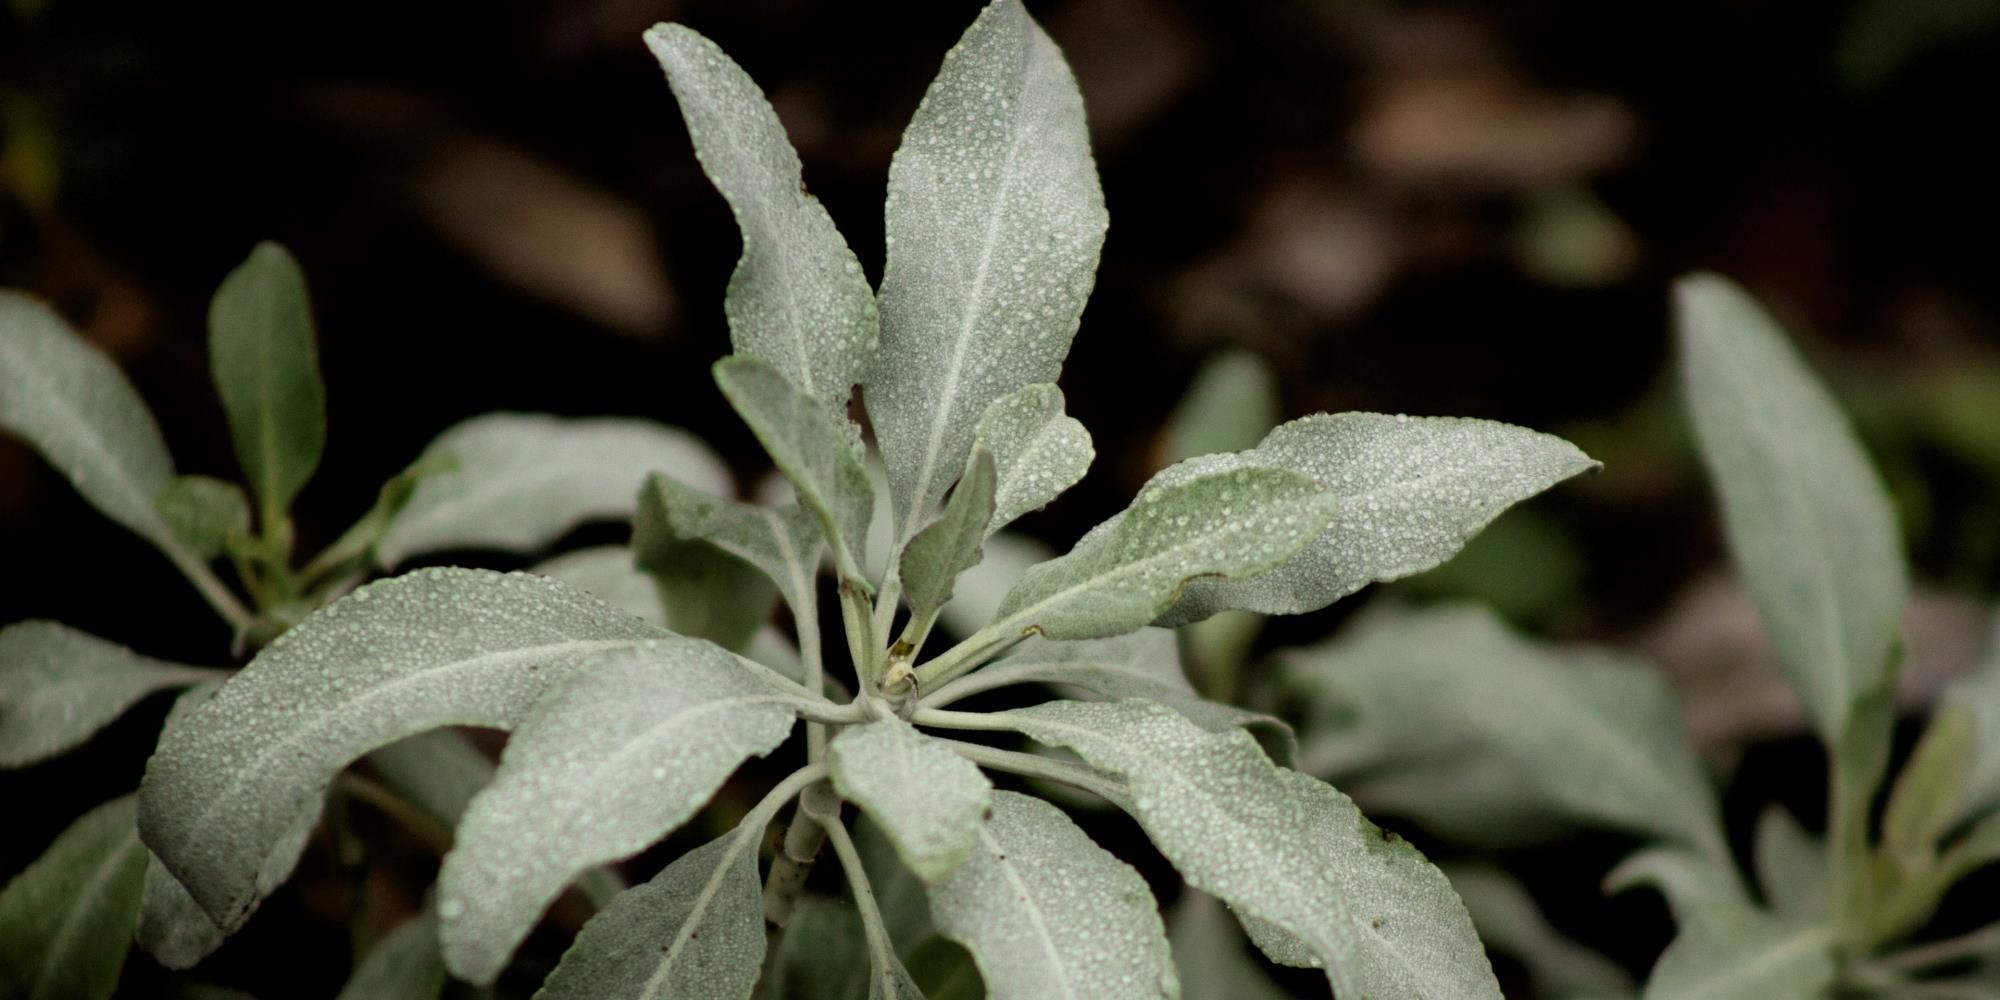 Sage vs White Sage - What’s the difference?